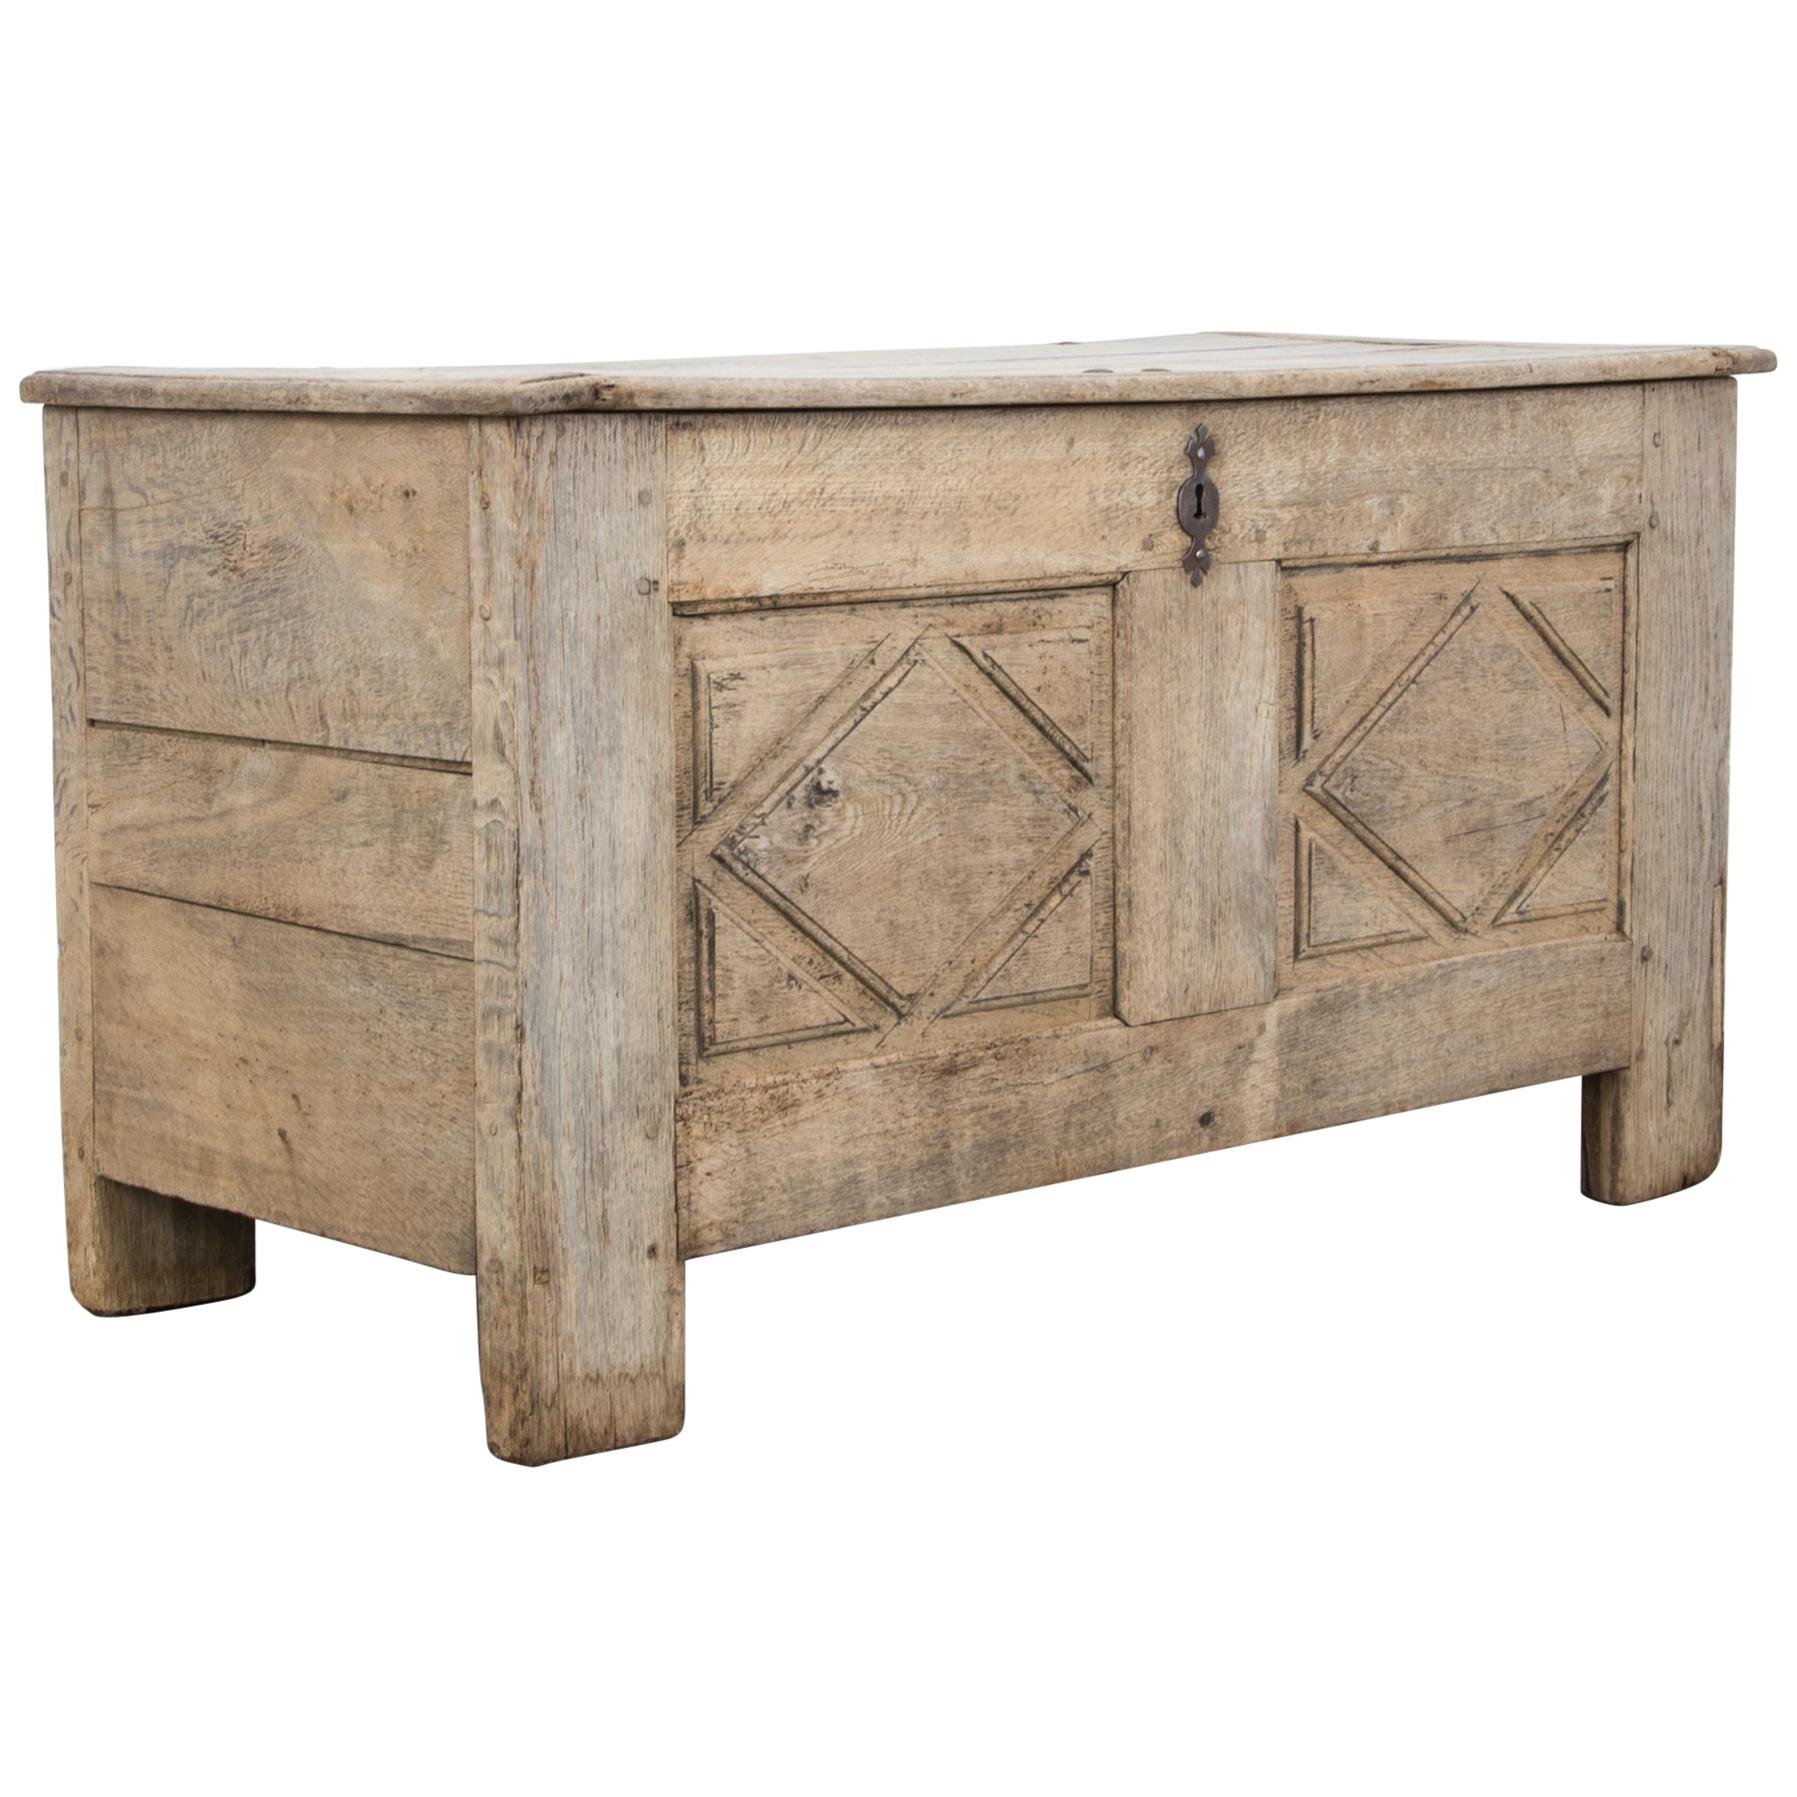 1820s Bleached Oak French Trunk